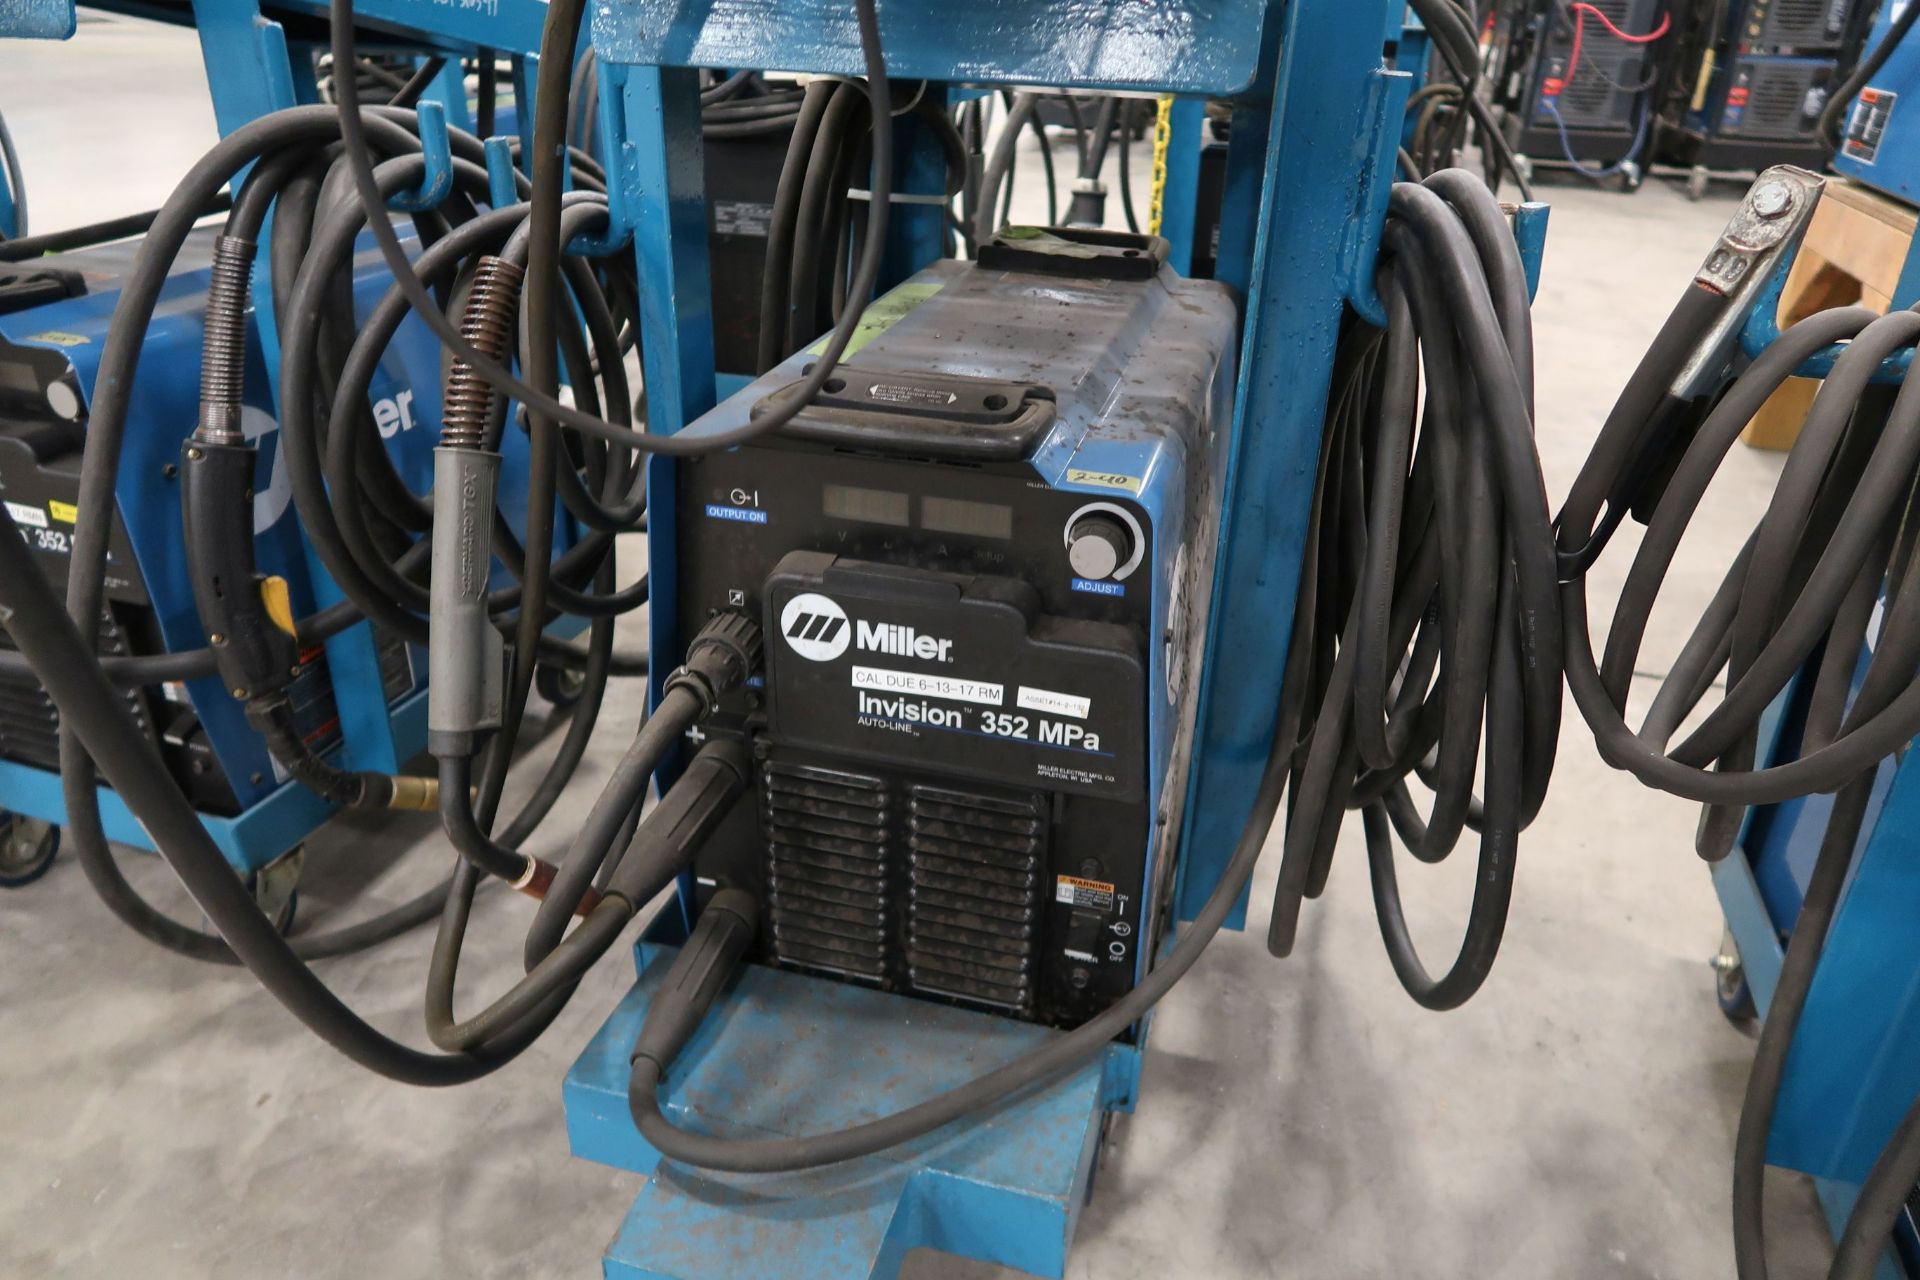 350 AMP MILLER INVISION 352 MPA WELDER WITH MILLER S-74 MPA PLUS WIRE FEEDER; FA 70113-11 - Image 2 of 3